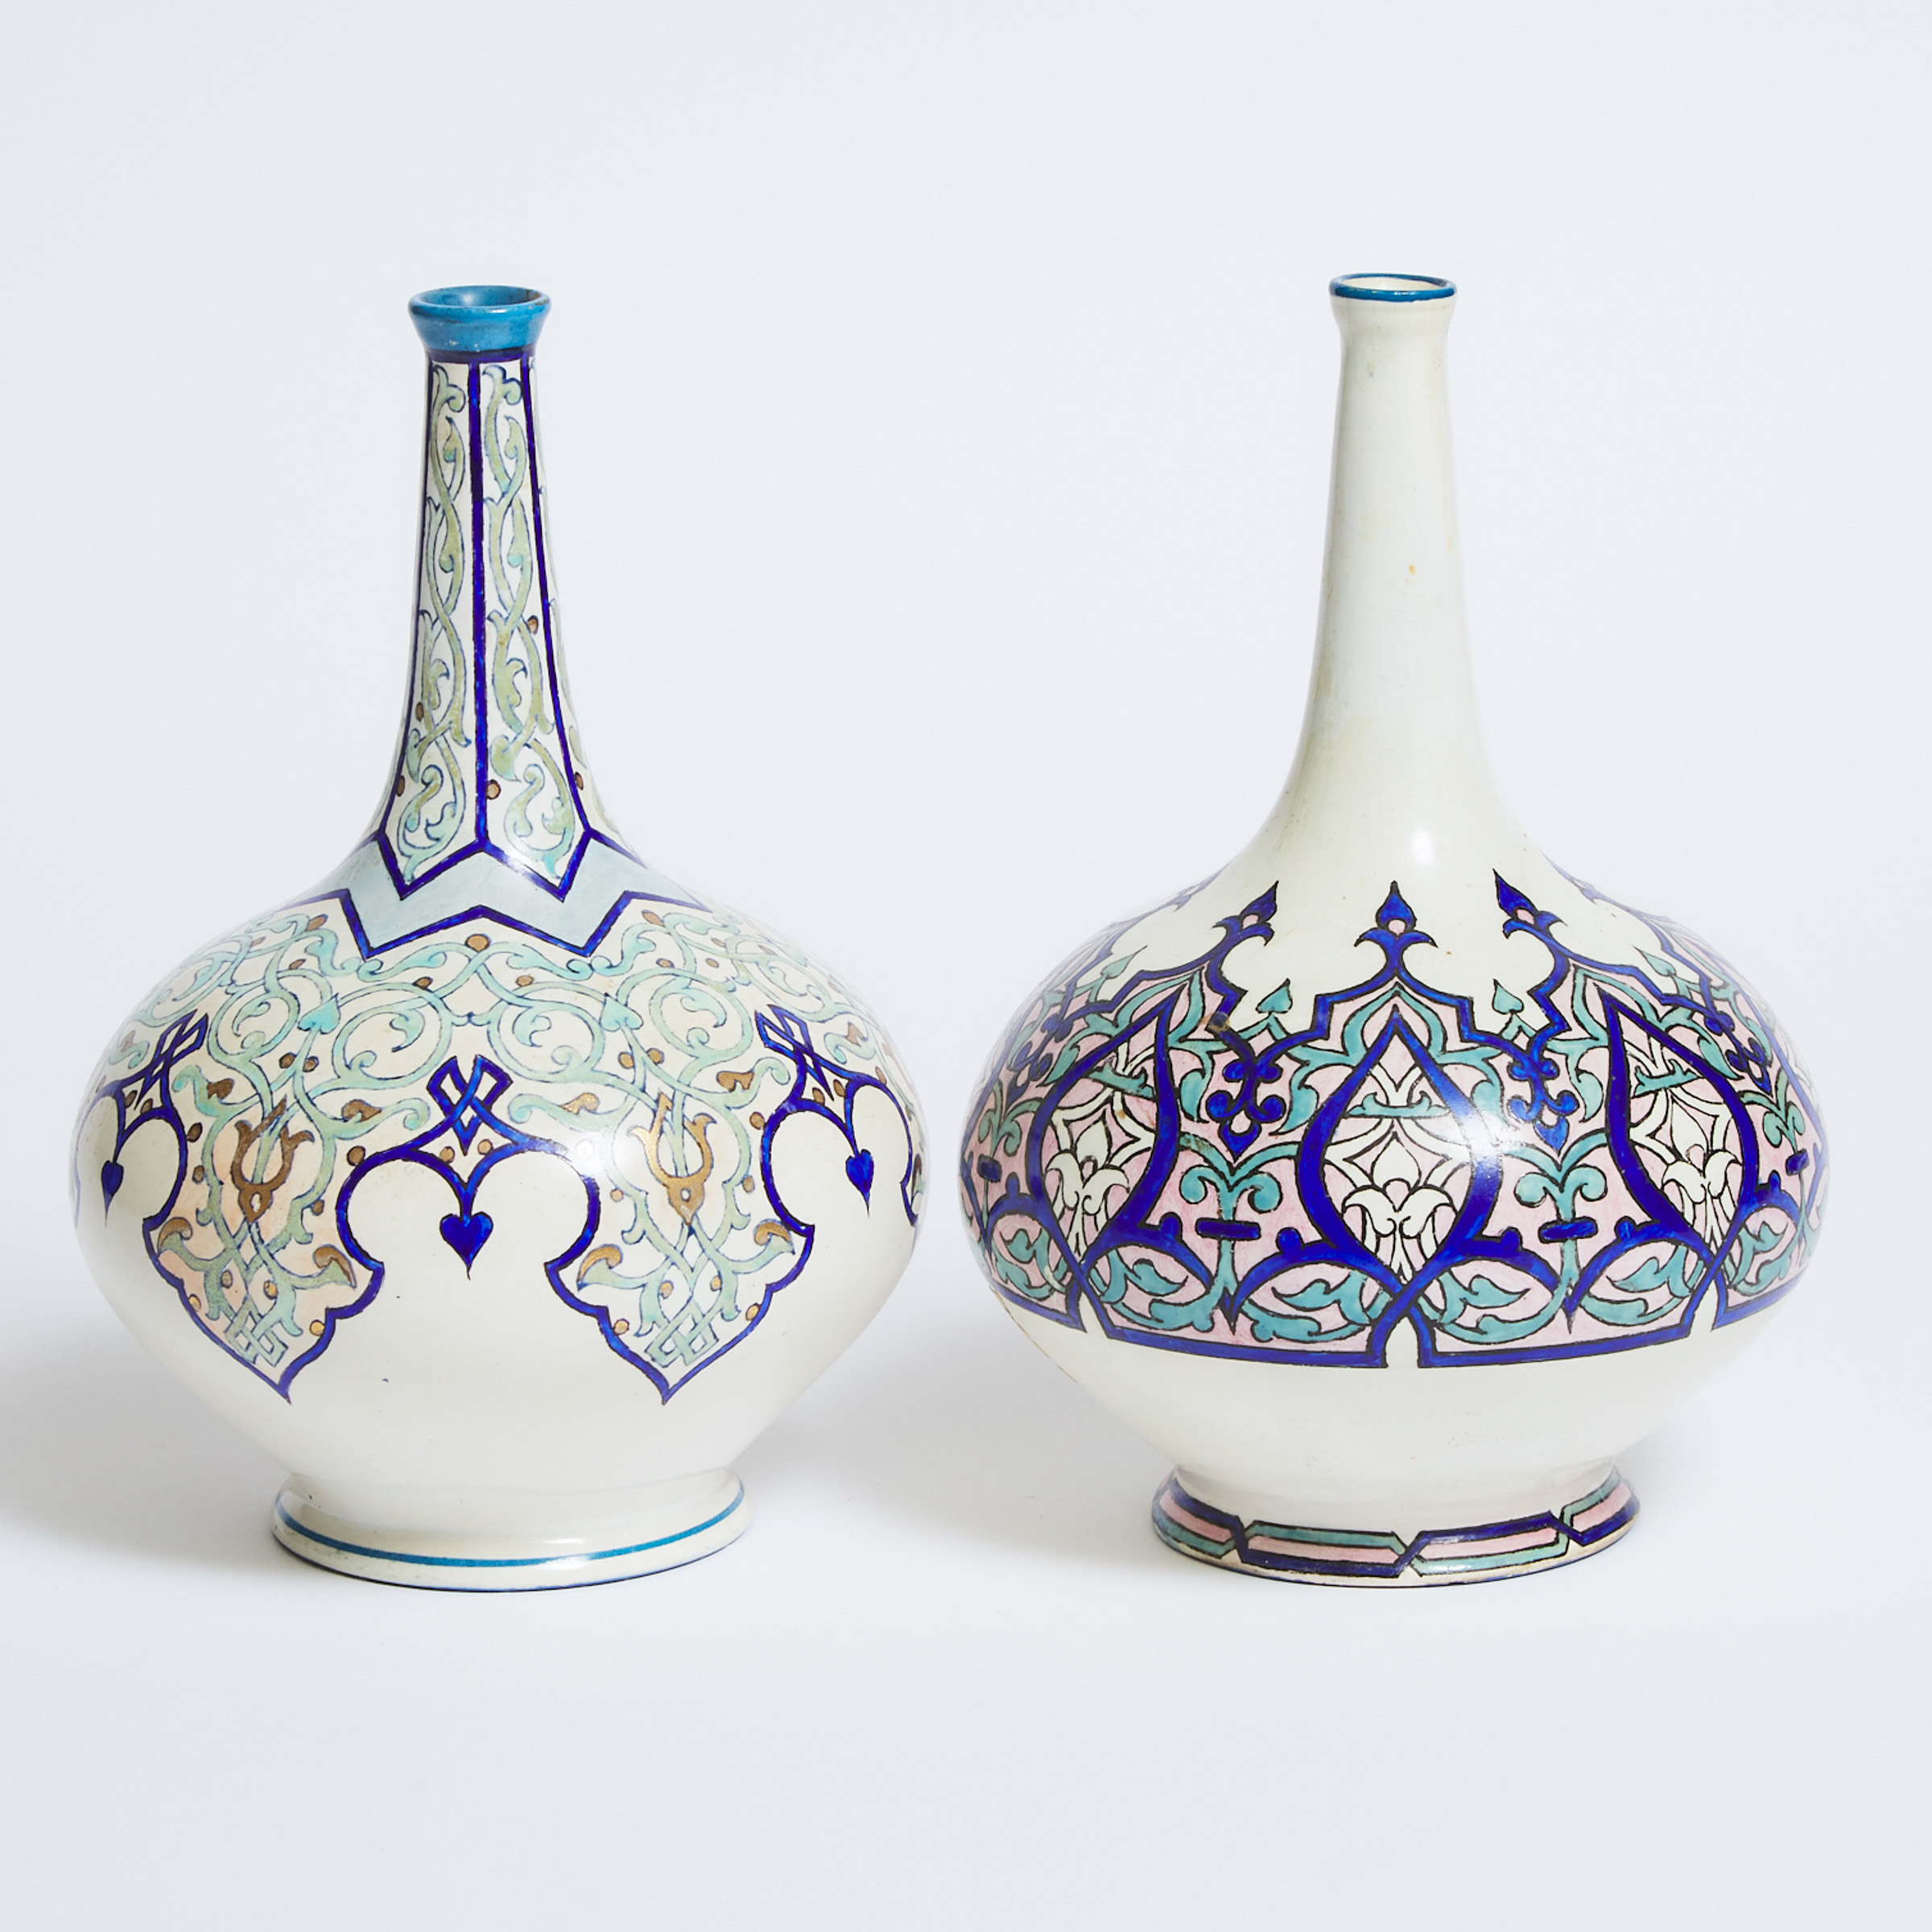 Pair of English Earthenware Persian-Style Painted Vases, late 19th century